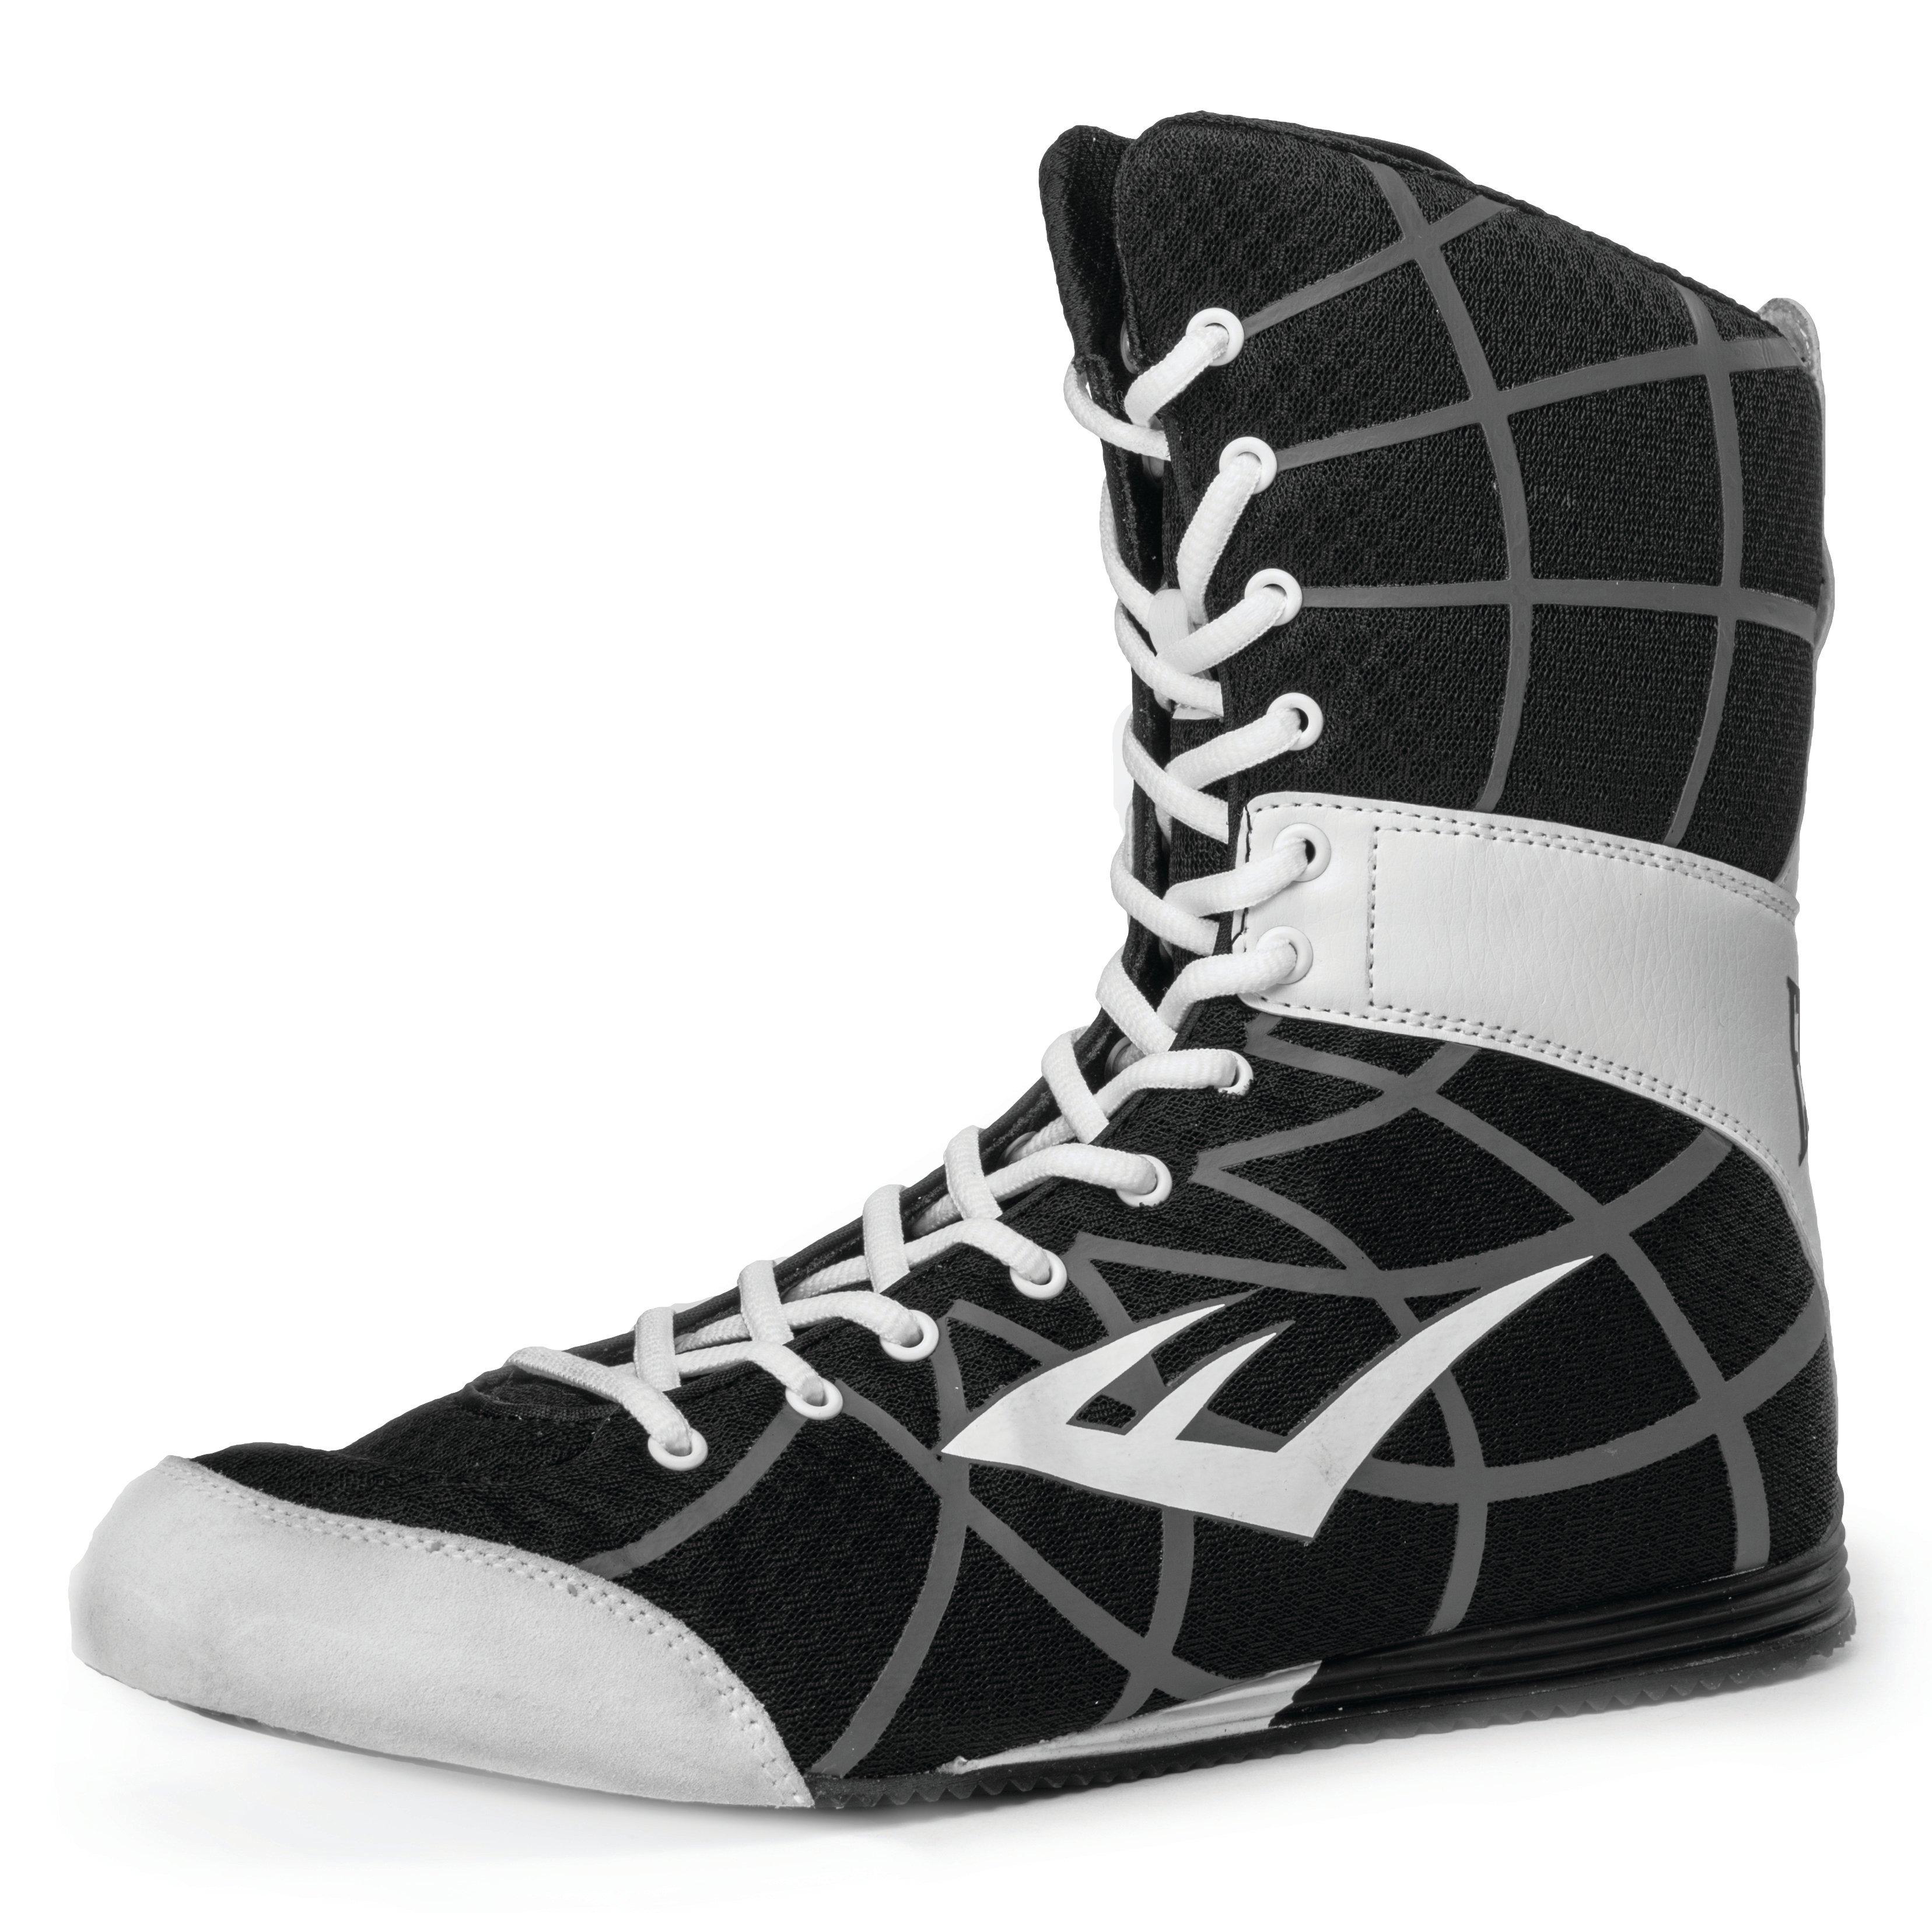 Everlast High Top Boxing Shoes-Black